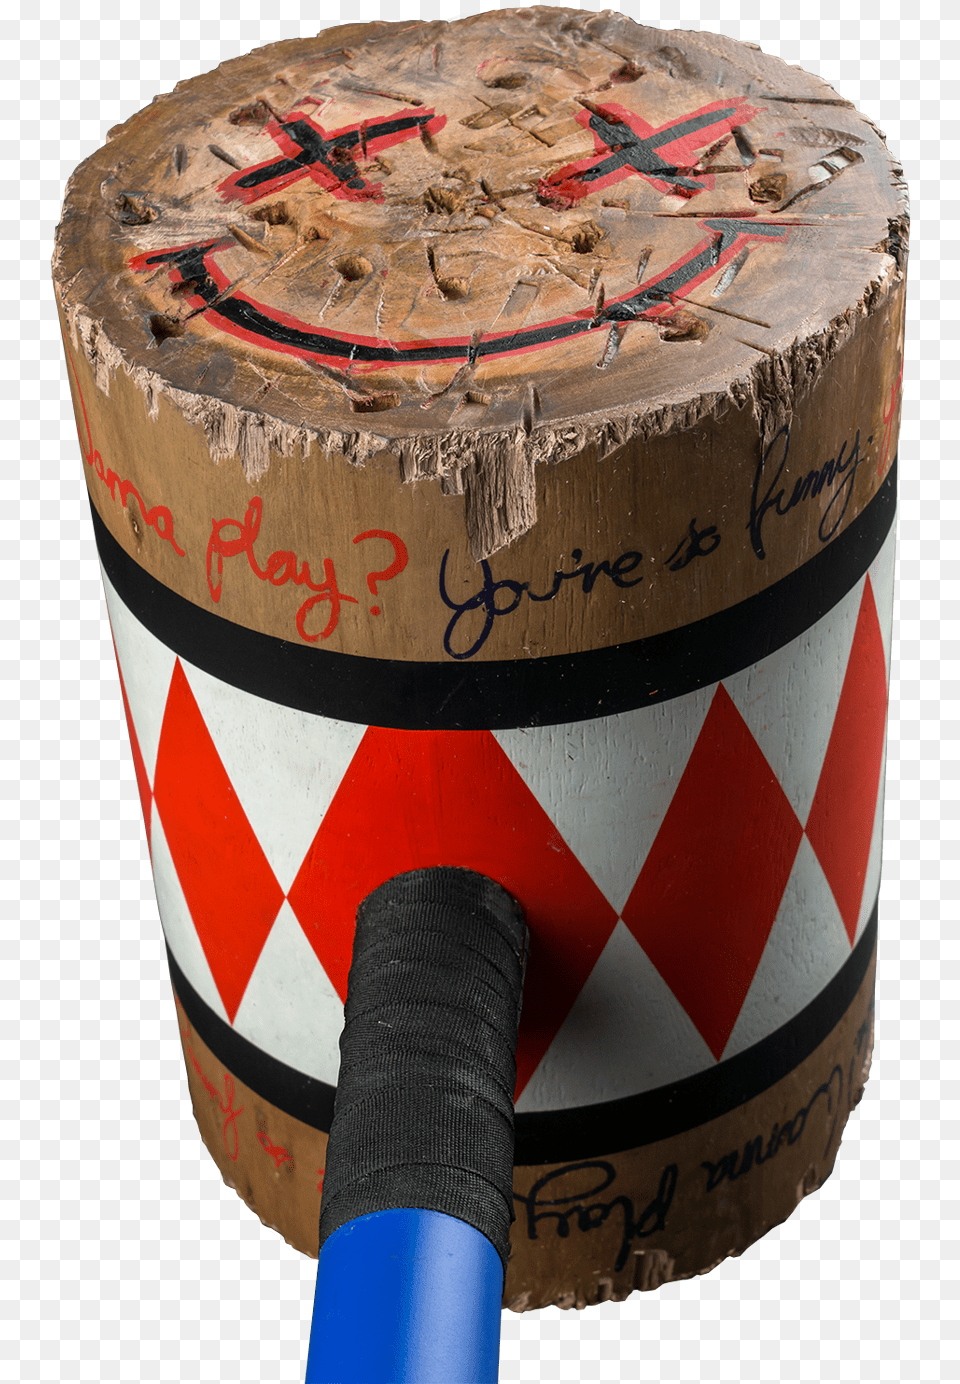 Suicide Squad Harley Quinn Wooden Mallet Replica Ikon Harley Quinn Mallet Replica, Aircraft, Transportation, Vehicle, Airplane Png Image